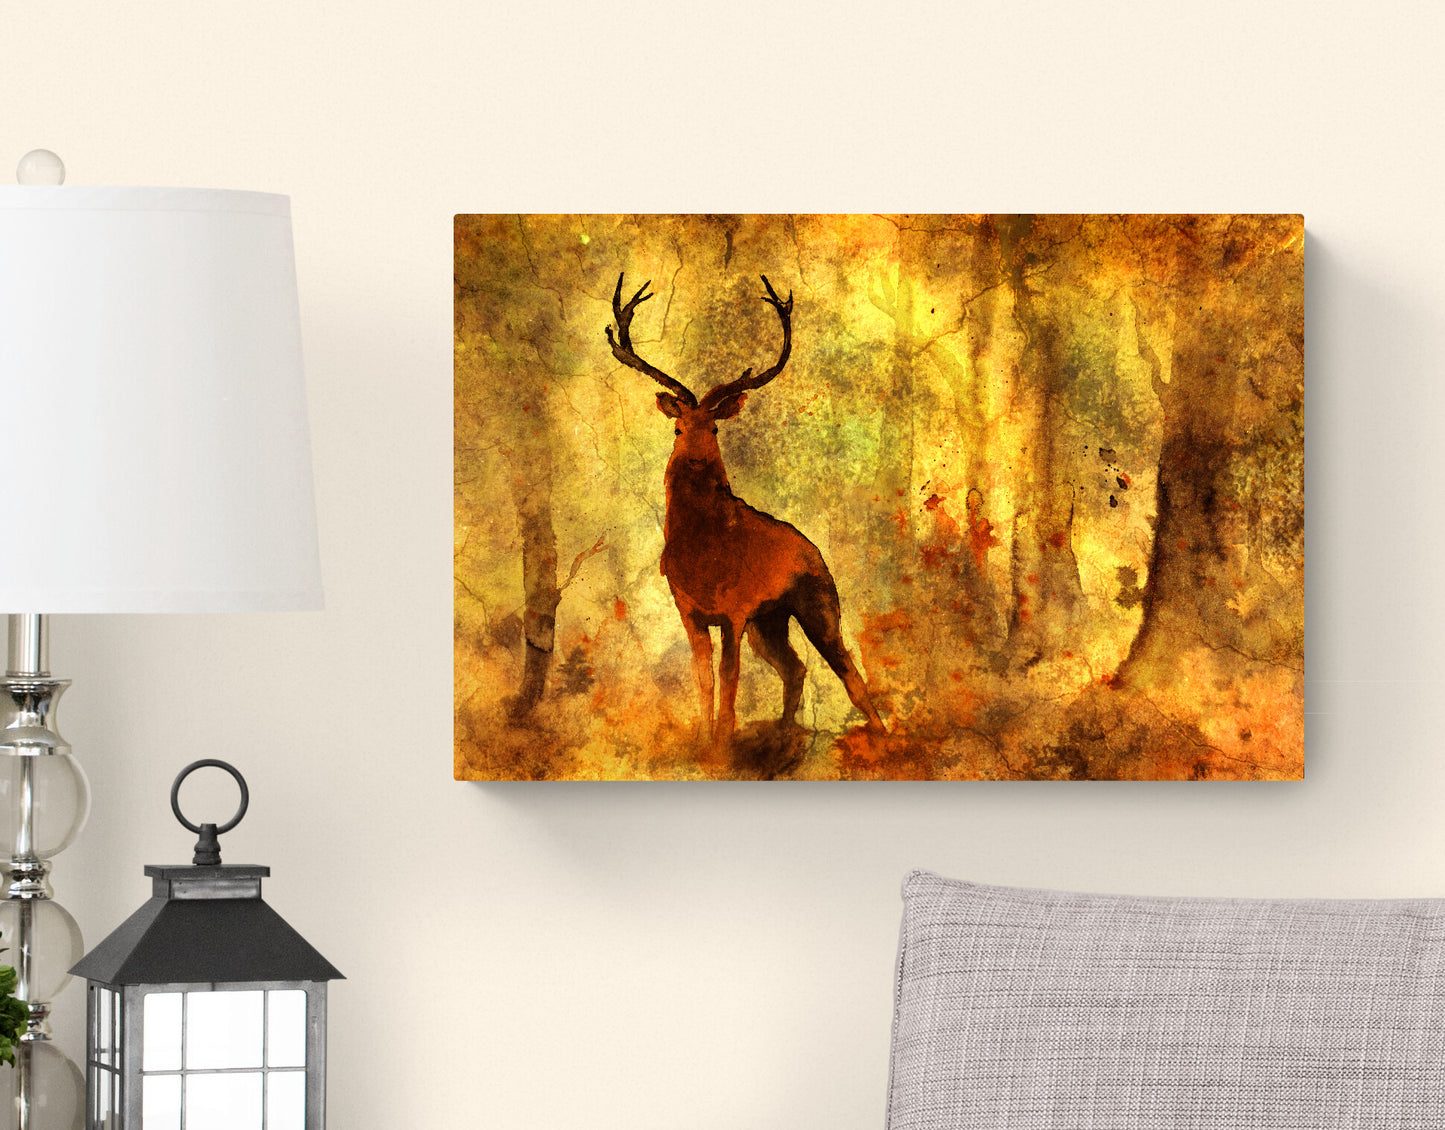 Print on canvas "Mystical Forest" - please note delivery times!